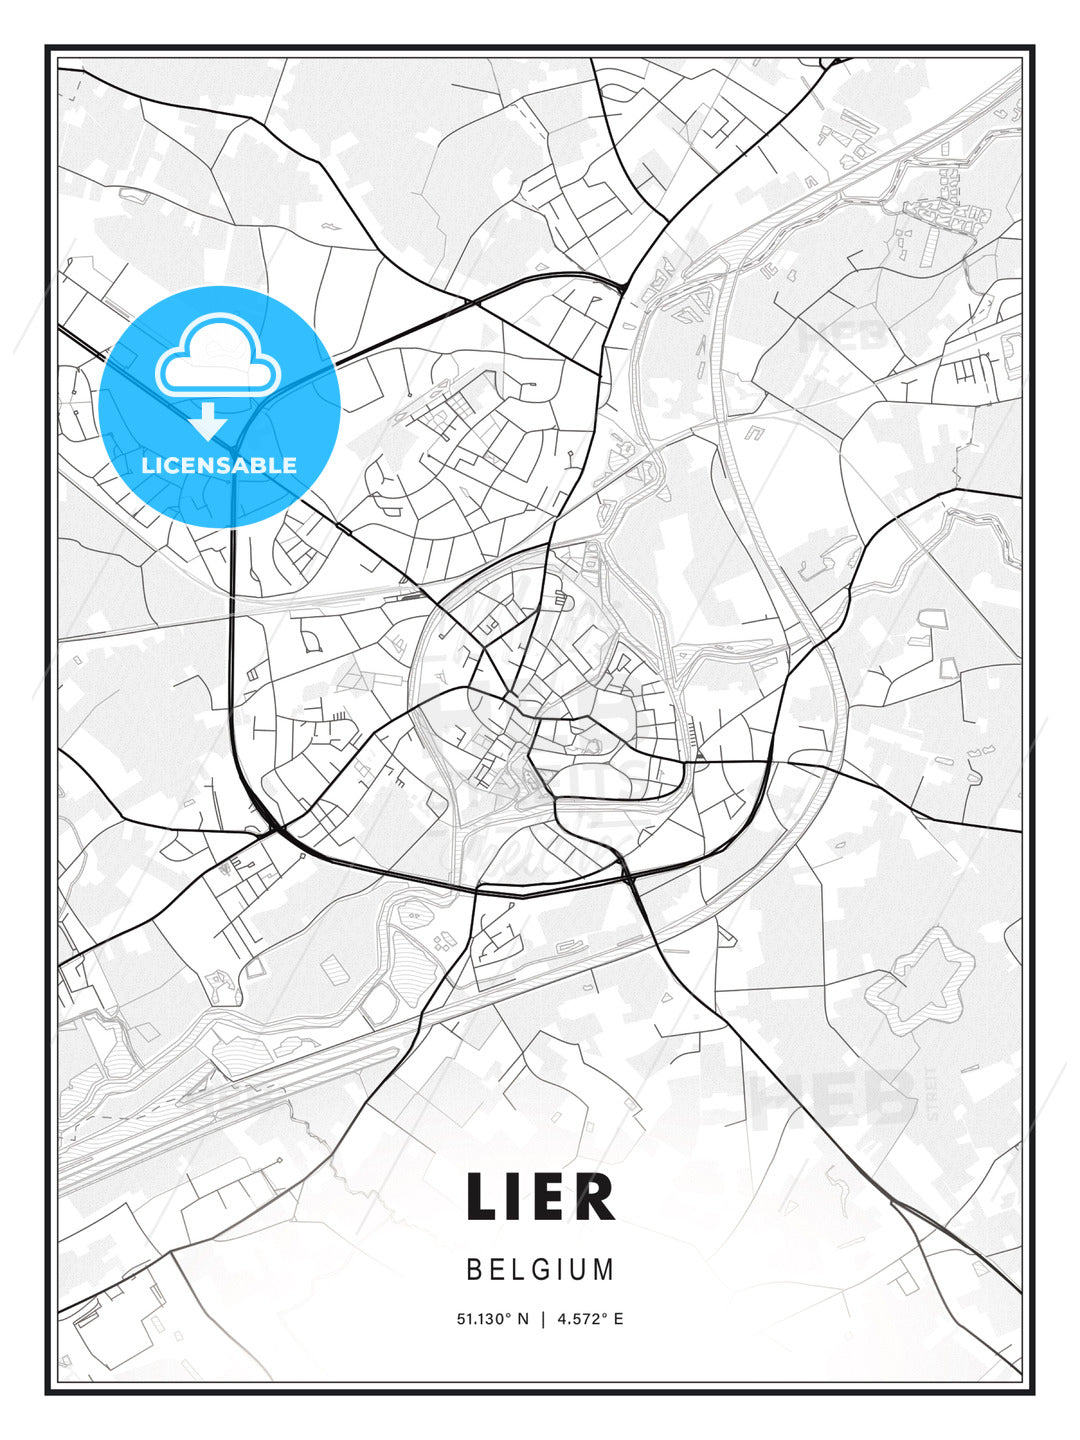 Lier, Belgium, Modern Print Template in Various Formats - HEBSTREITS Sketches